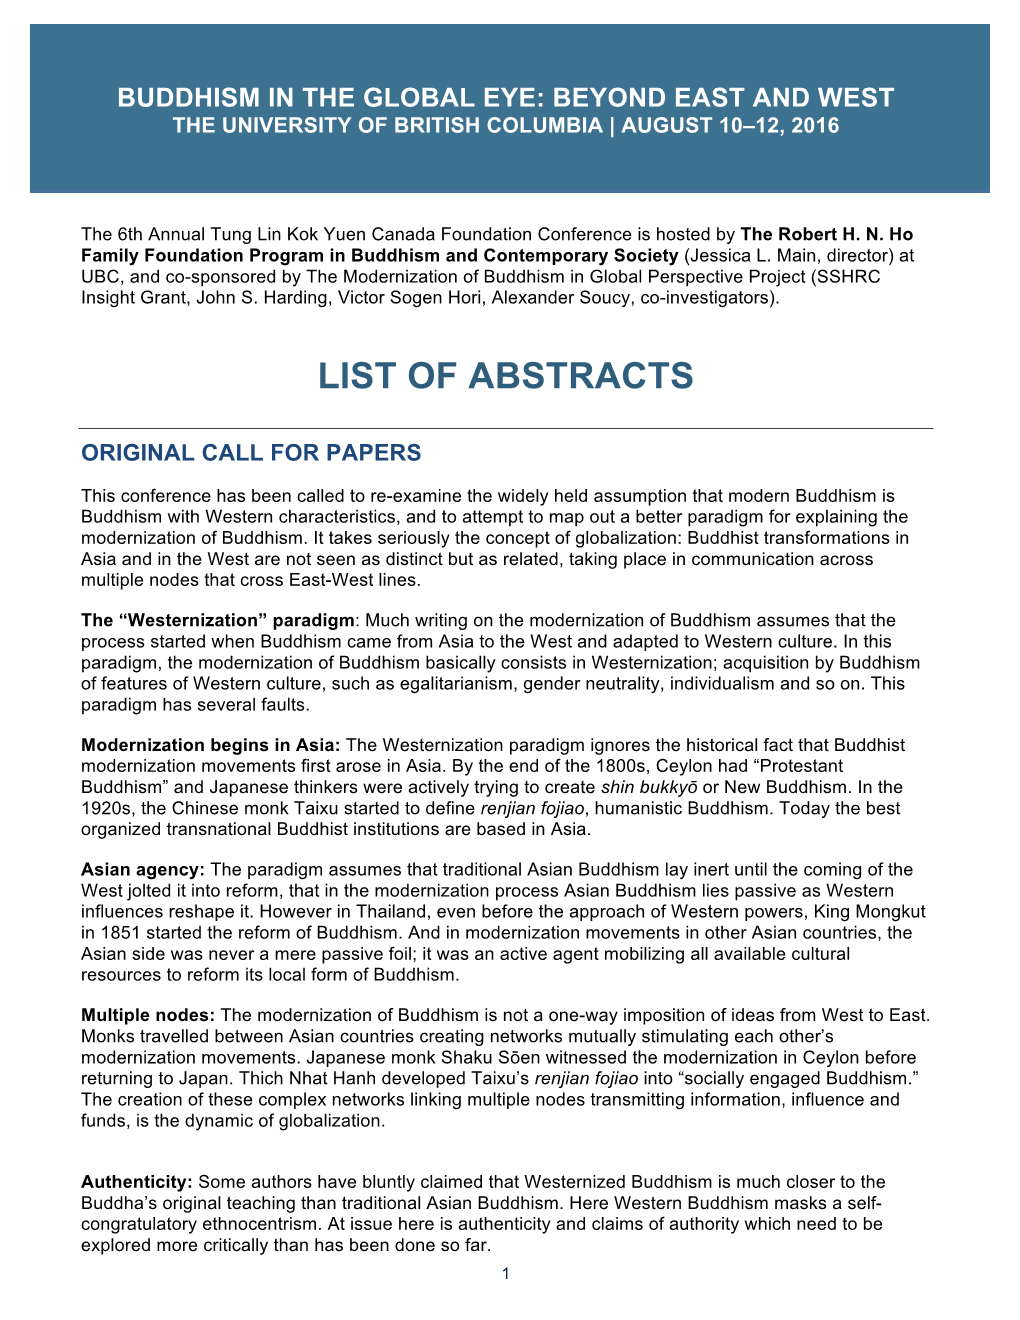 List of Abstracts